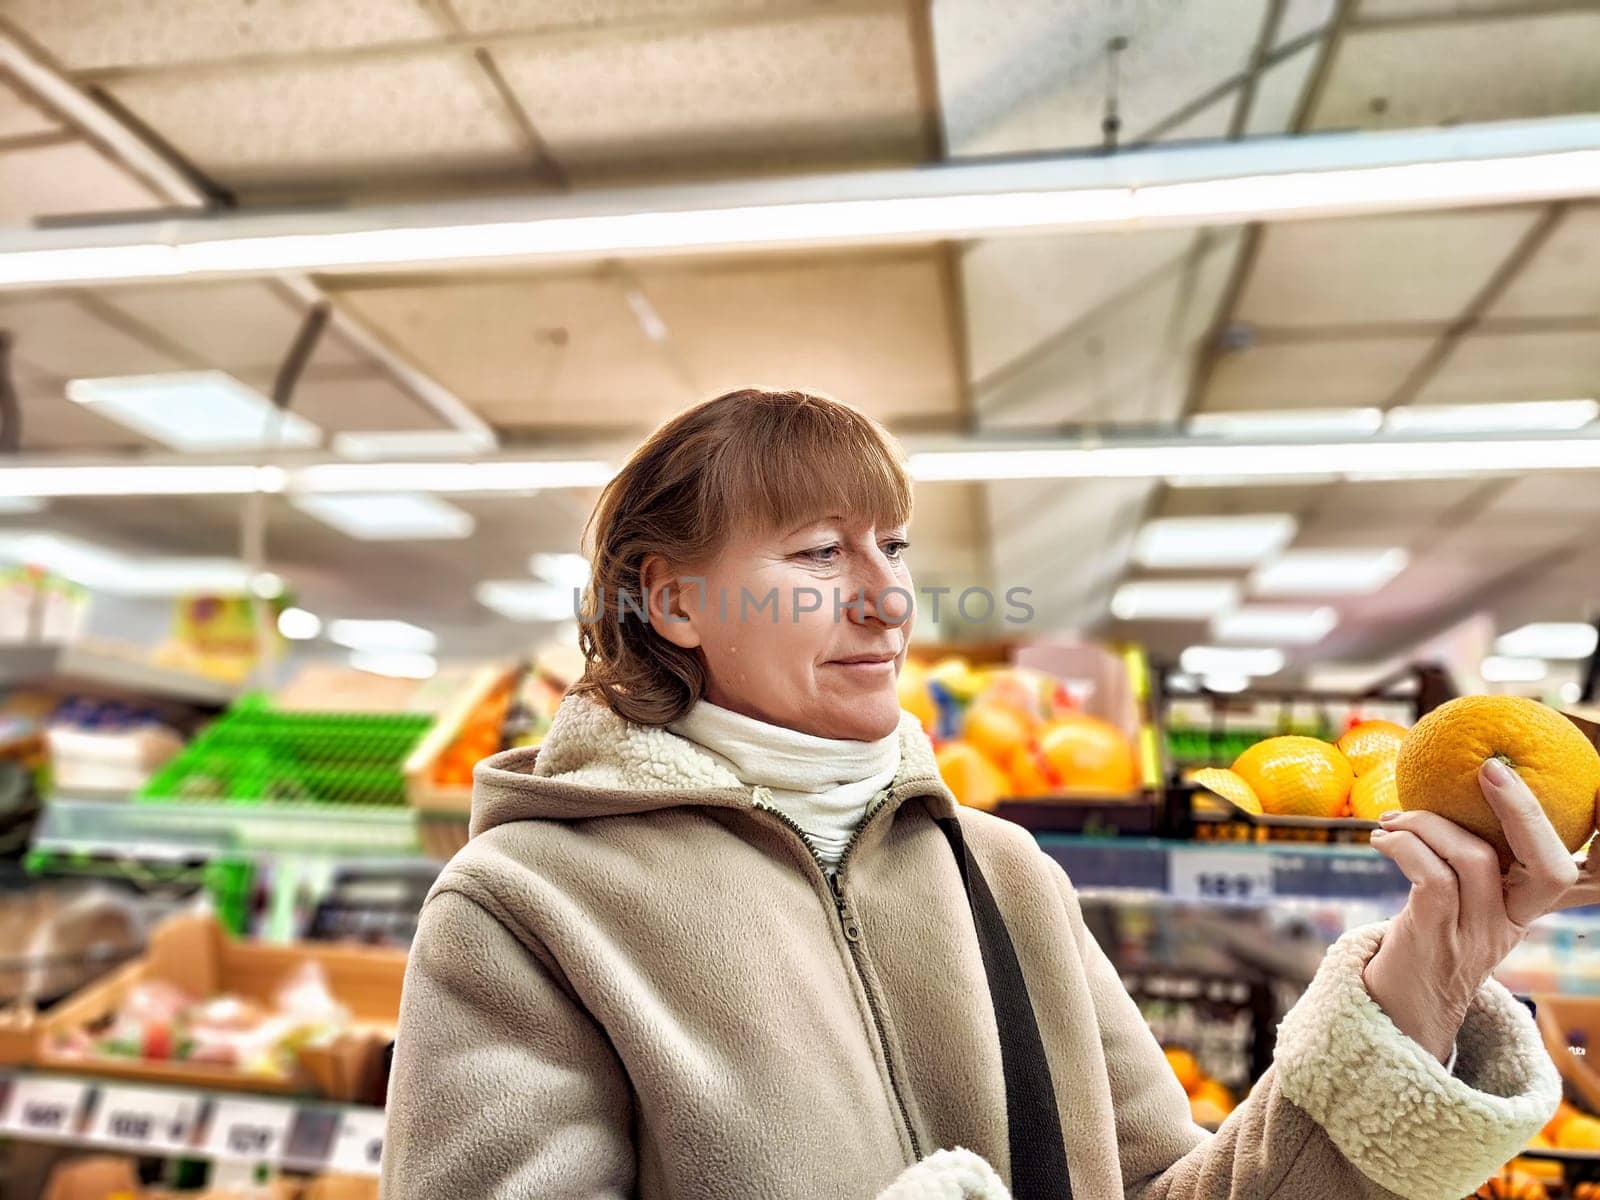 Middle-Aged Woman Holding an Orange in Grocery Store. Woman examines an orange, considering nutrition in a store aisle. Concept of proper nutrition